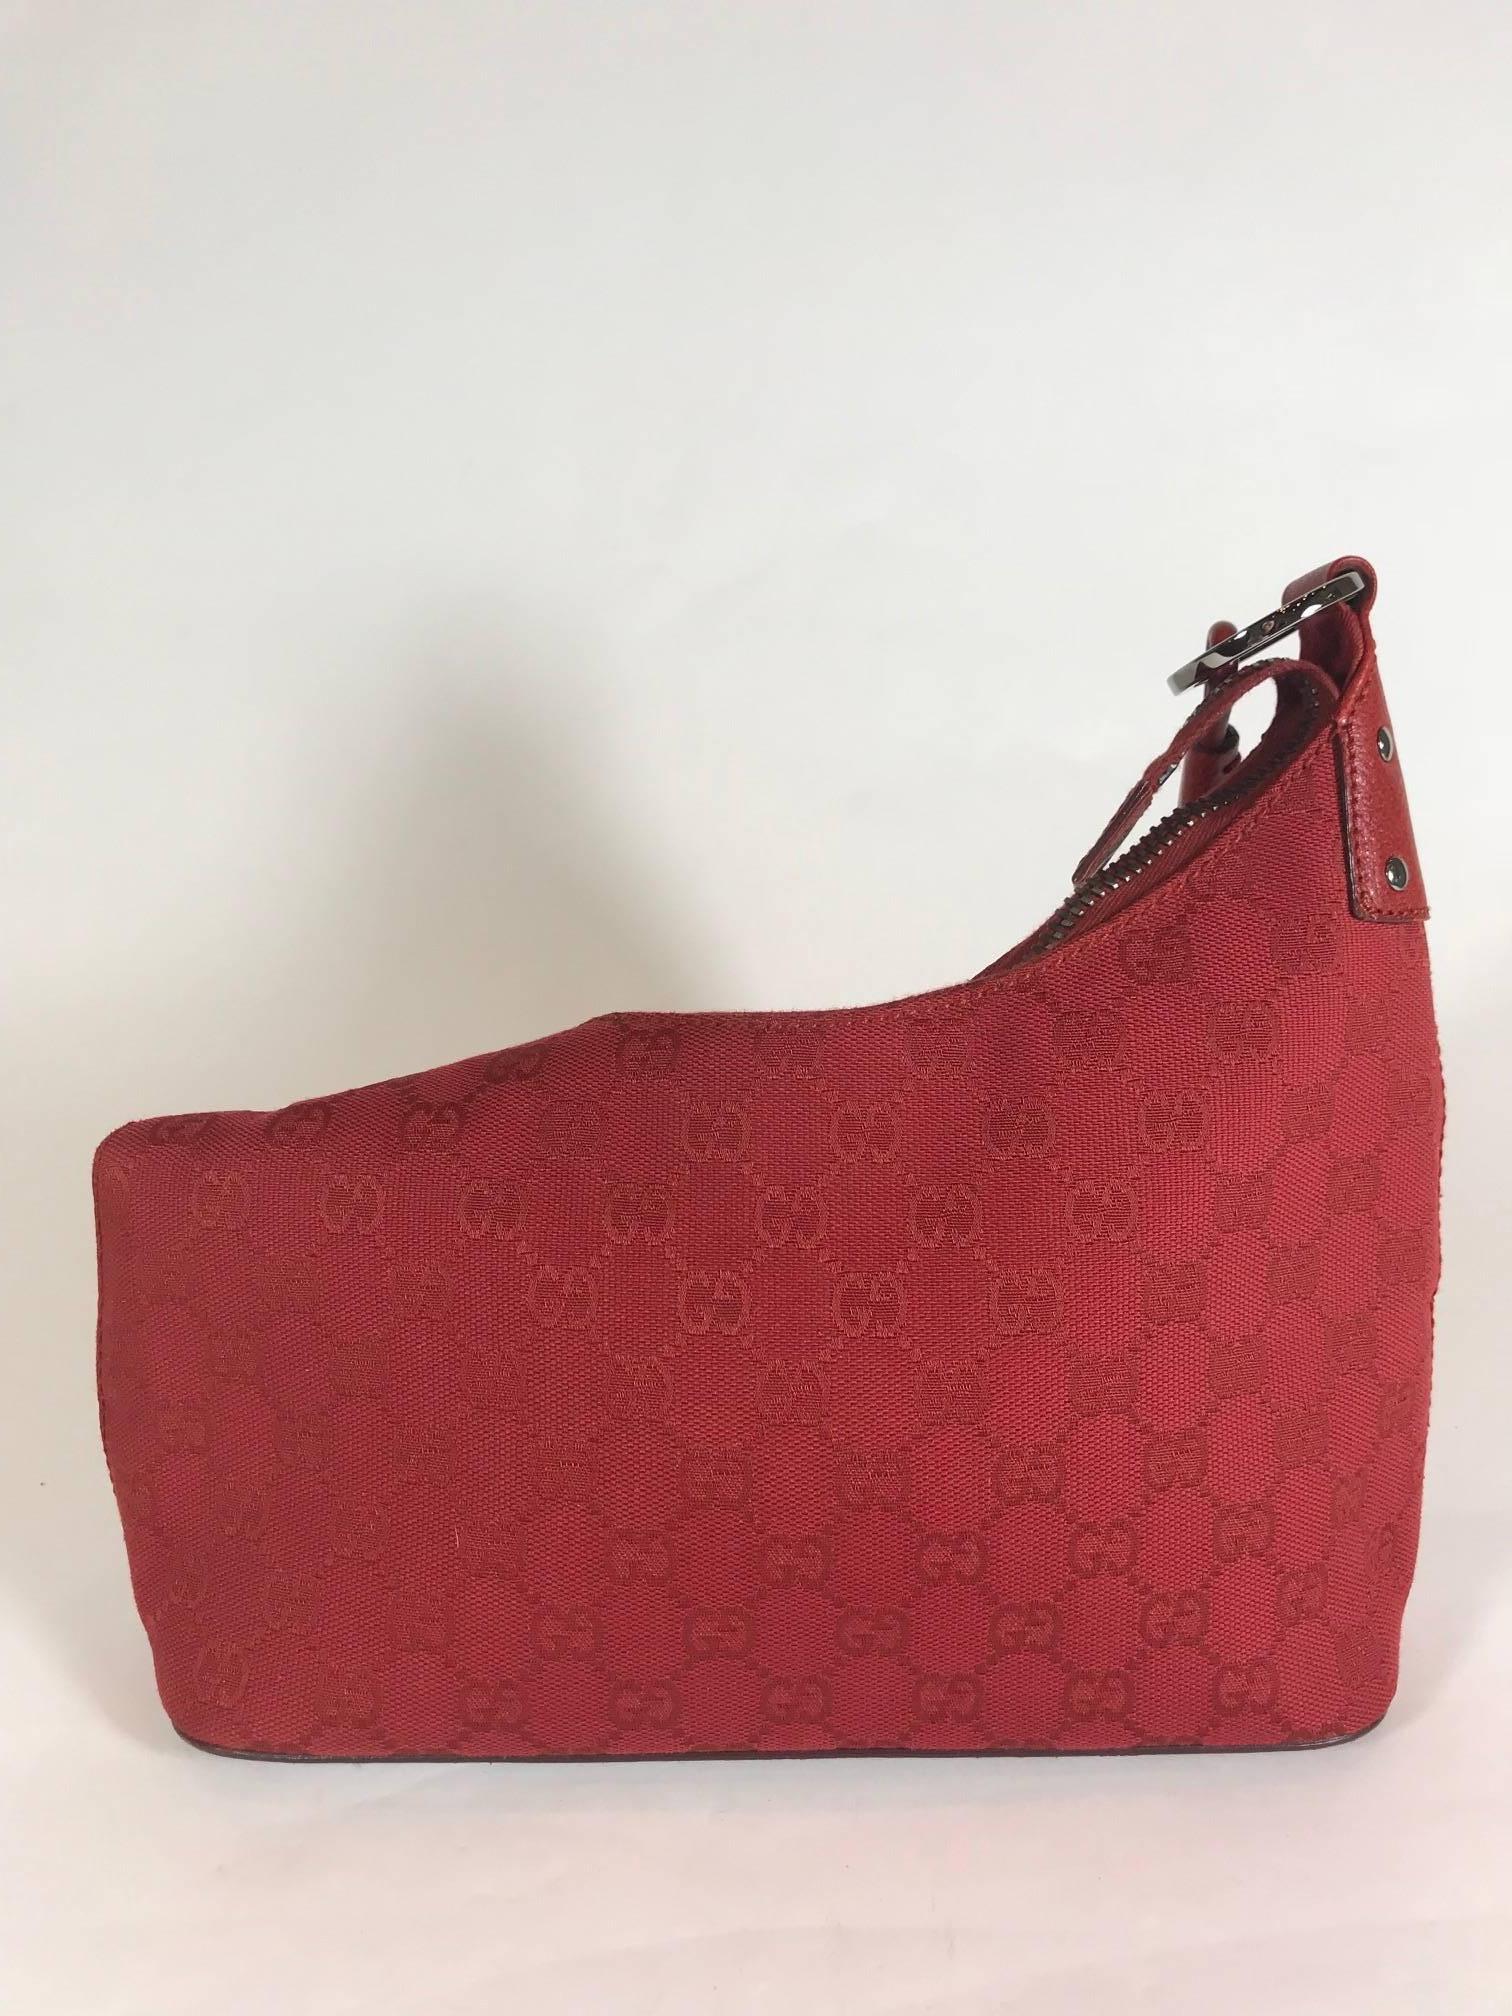 Women's or Men's Gucci Small Red Canvas GG Hobo